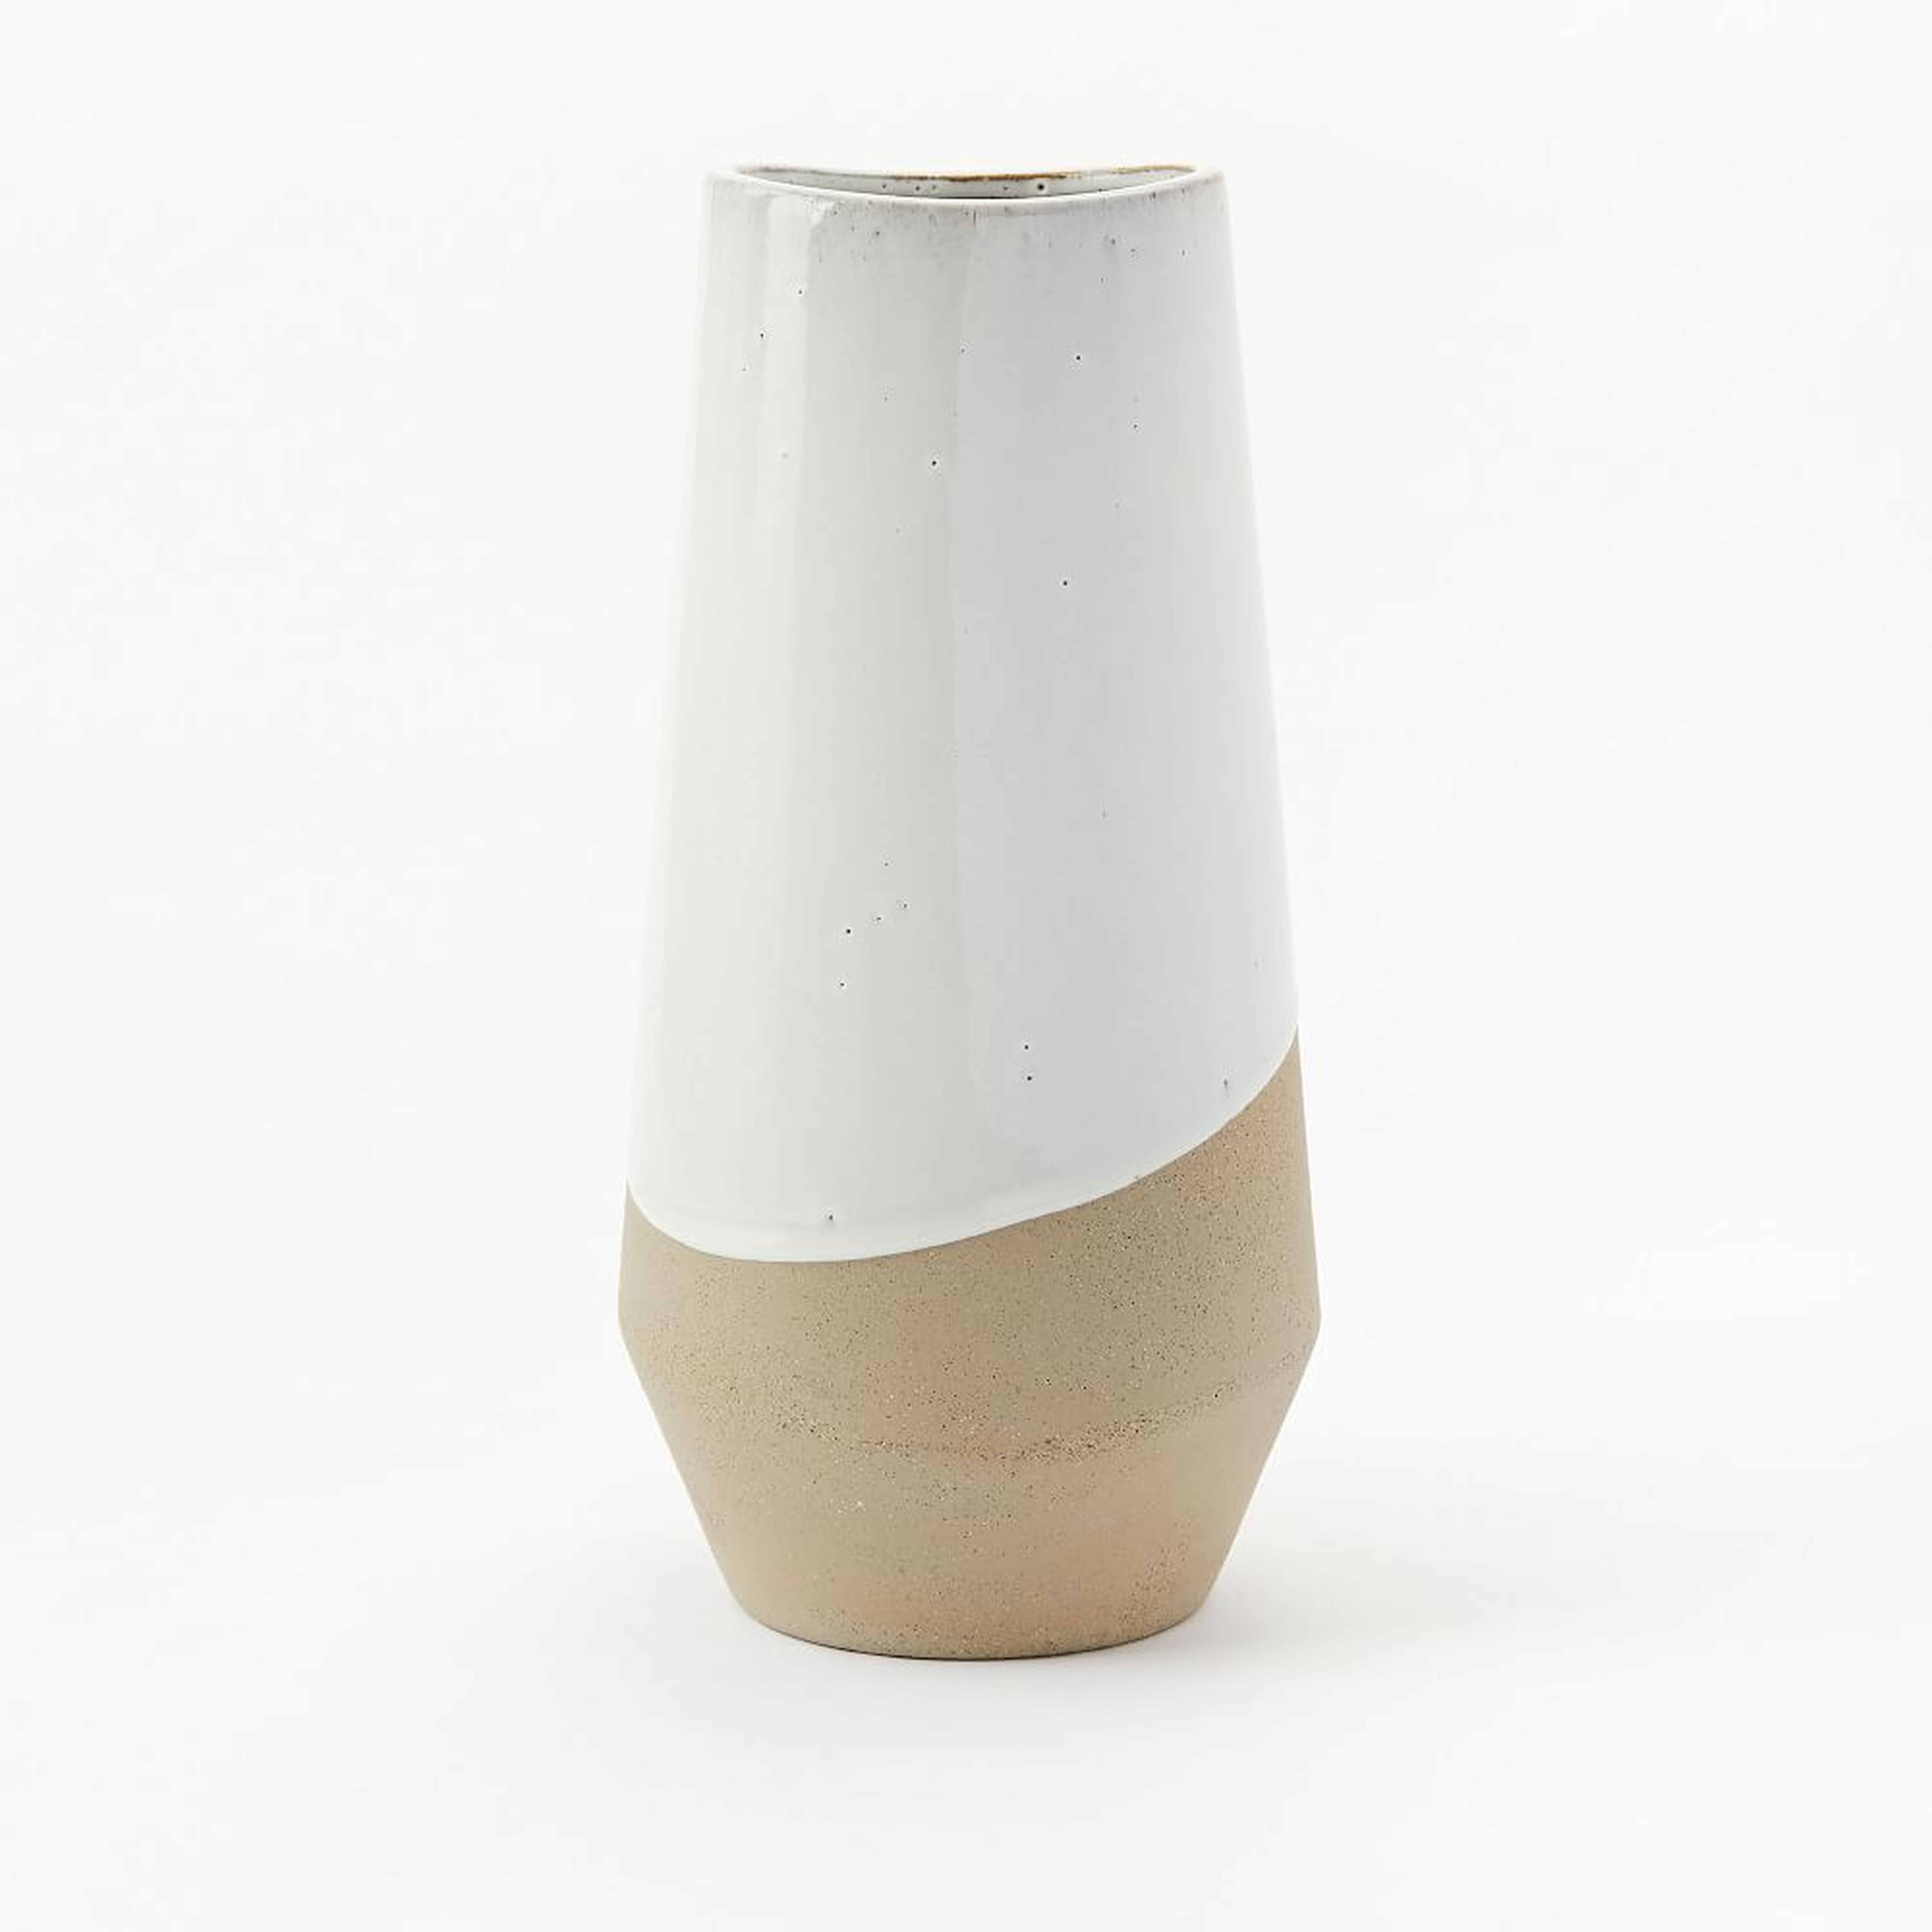 Half-Dipped Stoneware Vase, Gray/White, Tall Tapered, 13.5" - West Elm